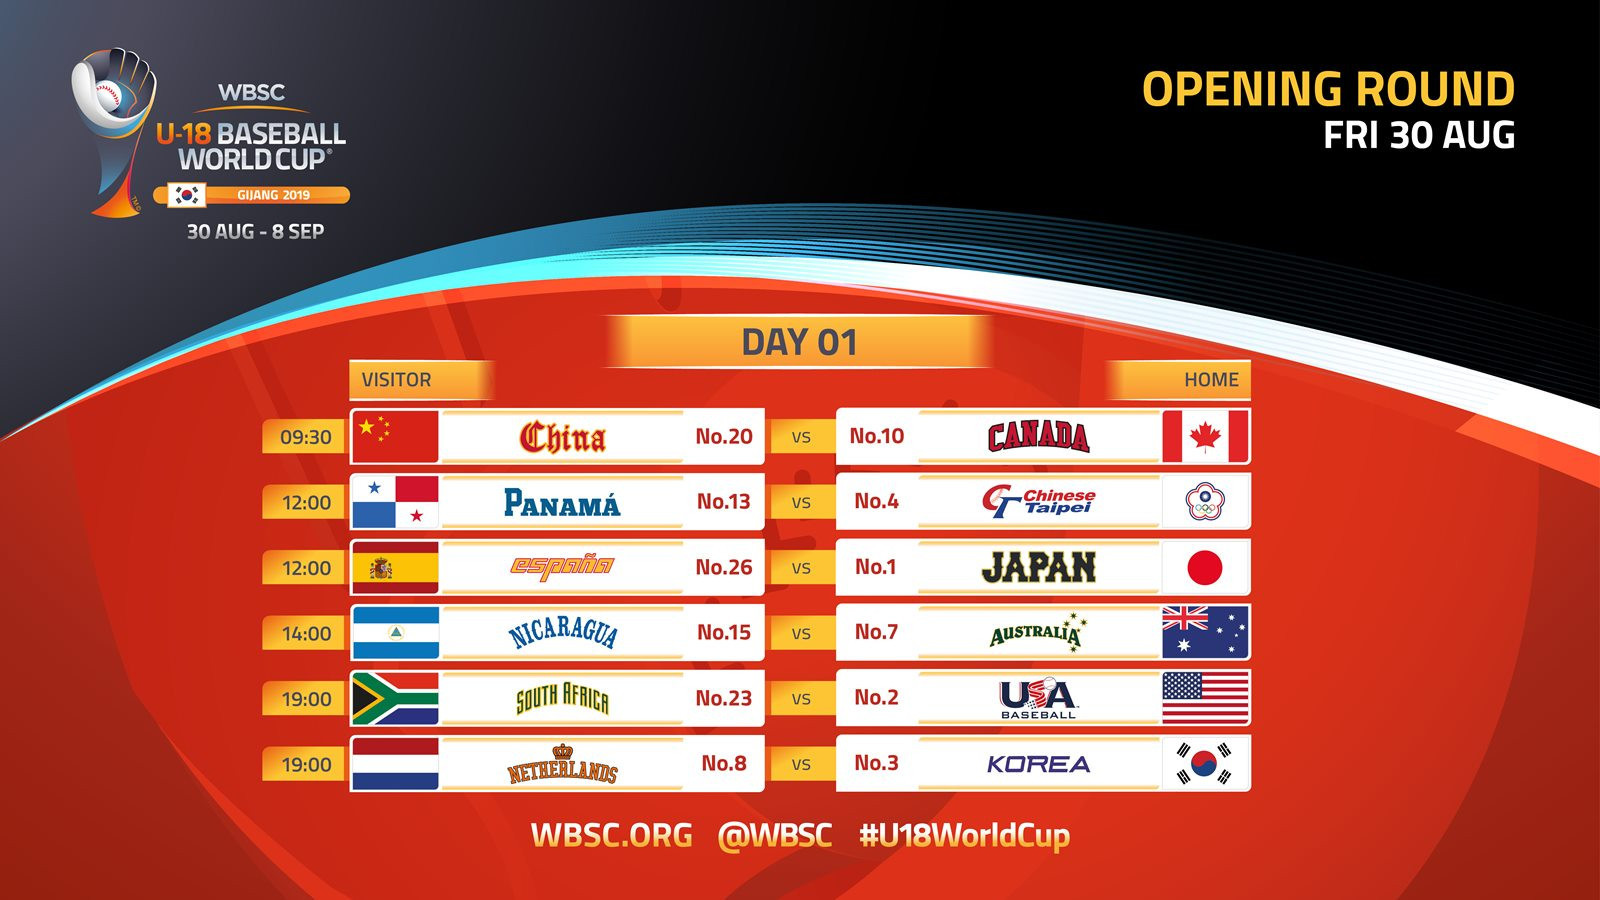 Six matches are due to be held on the opening day in Gijan ©WBSC